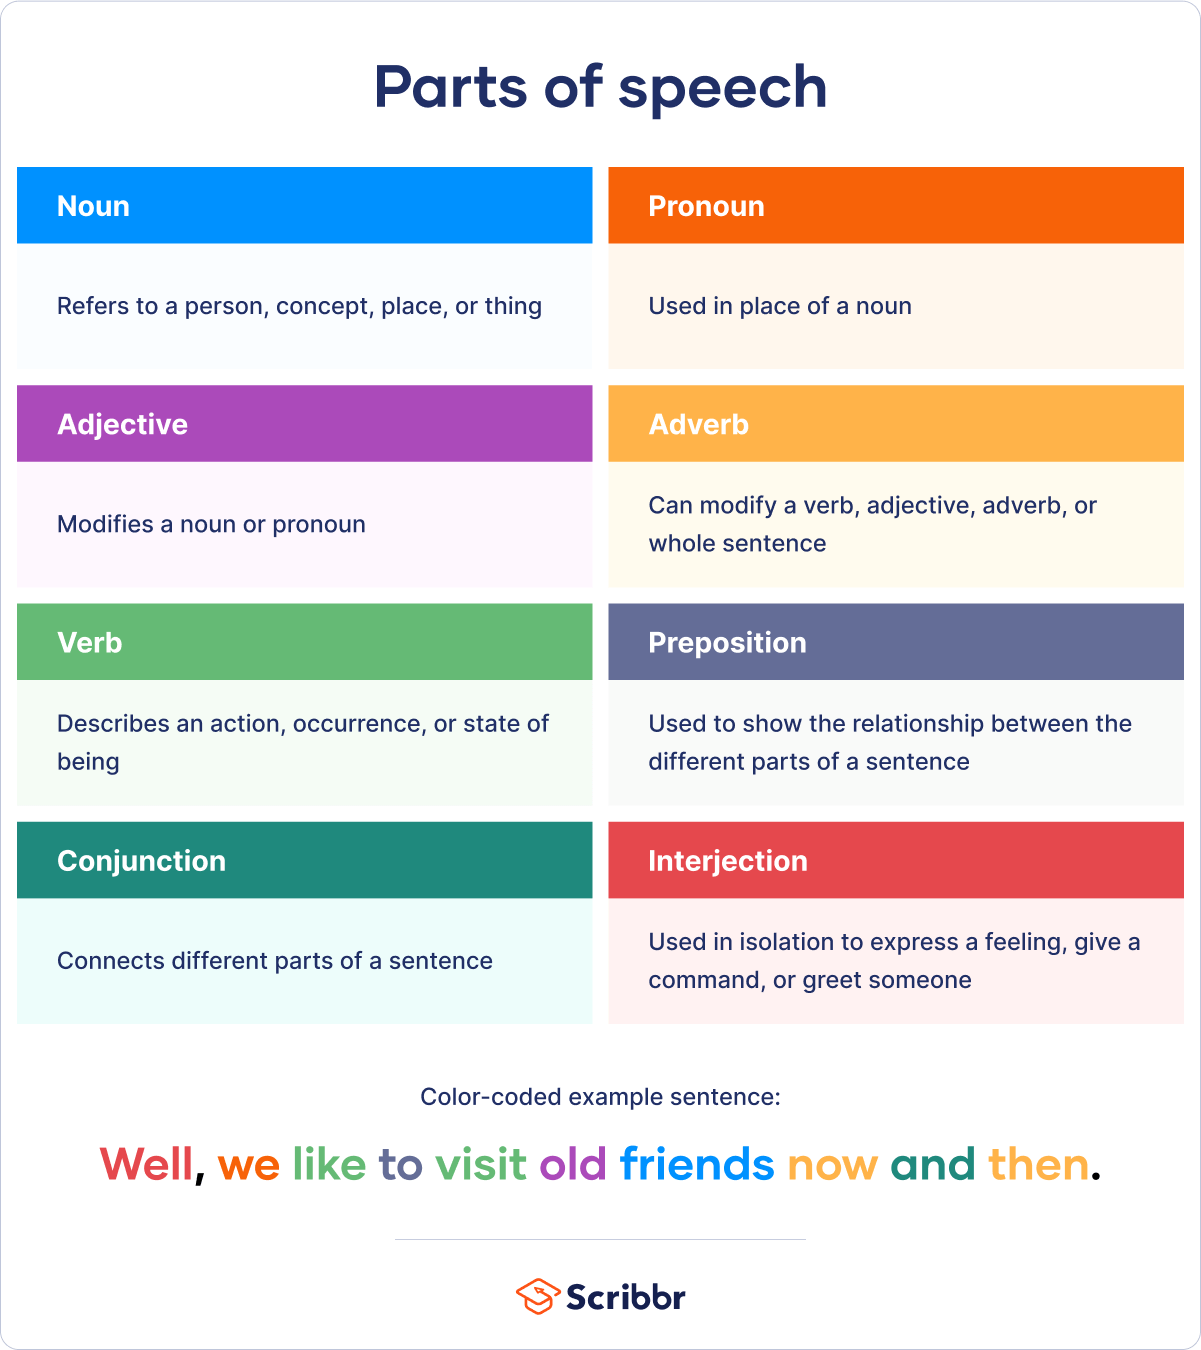 Really Learn English - English Parts of Speech: What is a Part of